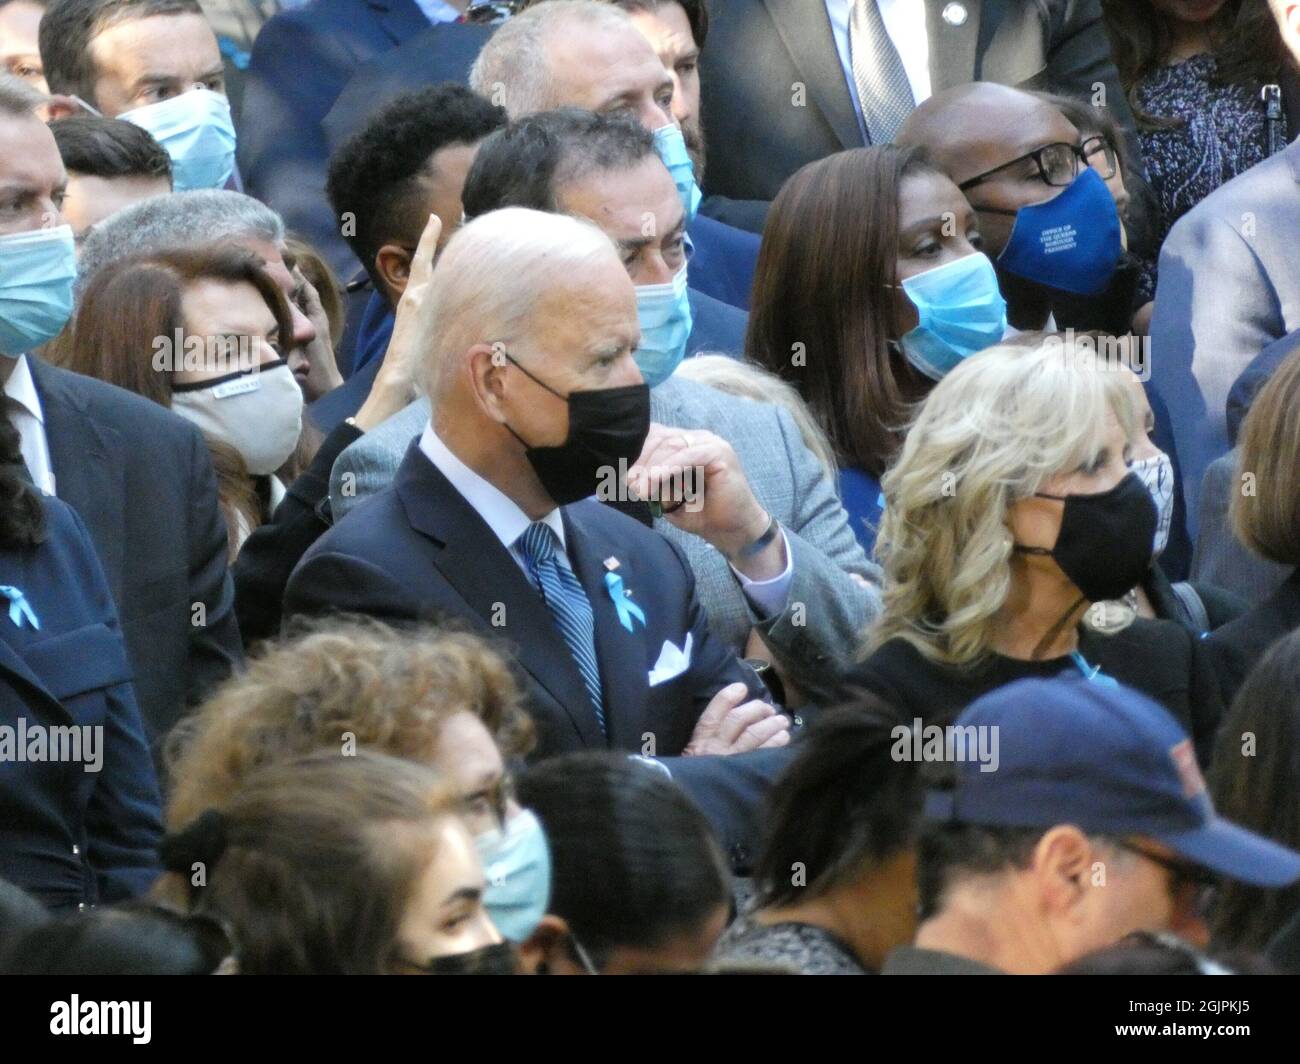 New York, USA. 11th Sep, 2021. (NEW) New York Solemnly Observes 20th Anniversary of 9/11 Terrorist Strikes. Sept 11, 2021, Ground Zero, Manhattan, NY, USA: Attended by President Joseph Biden, Former Presidents Barack Obama and Bill Clinton and their wives, US Senators Chuck Schumer and Kirstin Gillibrand, as well as NY Mayor Bill De Blasio and a retinue of Congressional Representatives, today's 20th Anniversary Ceremonies -- held at Ground Zero -- sadly and bitterly recalled the savage airborne assaults on New York's Twin Towers that claimed 3,000 lives, and which forever-blunted America's Stock Photo